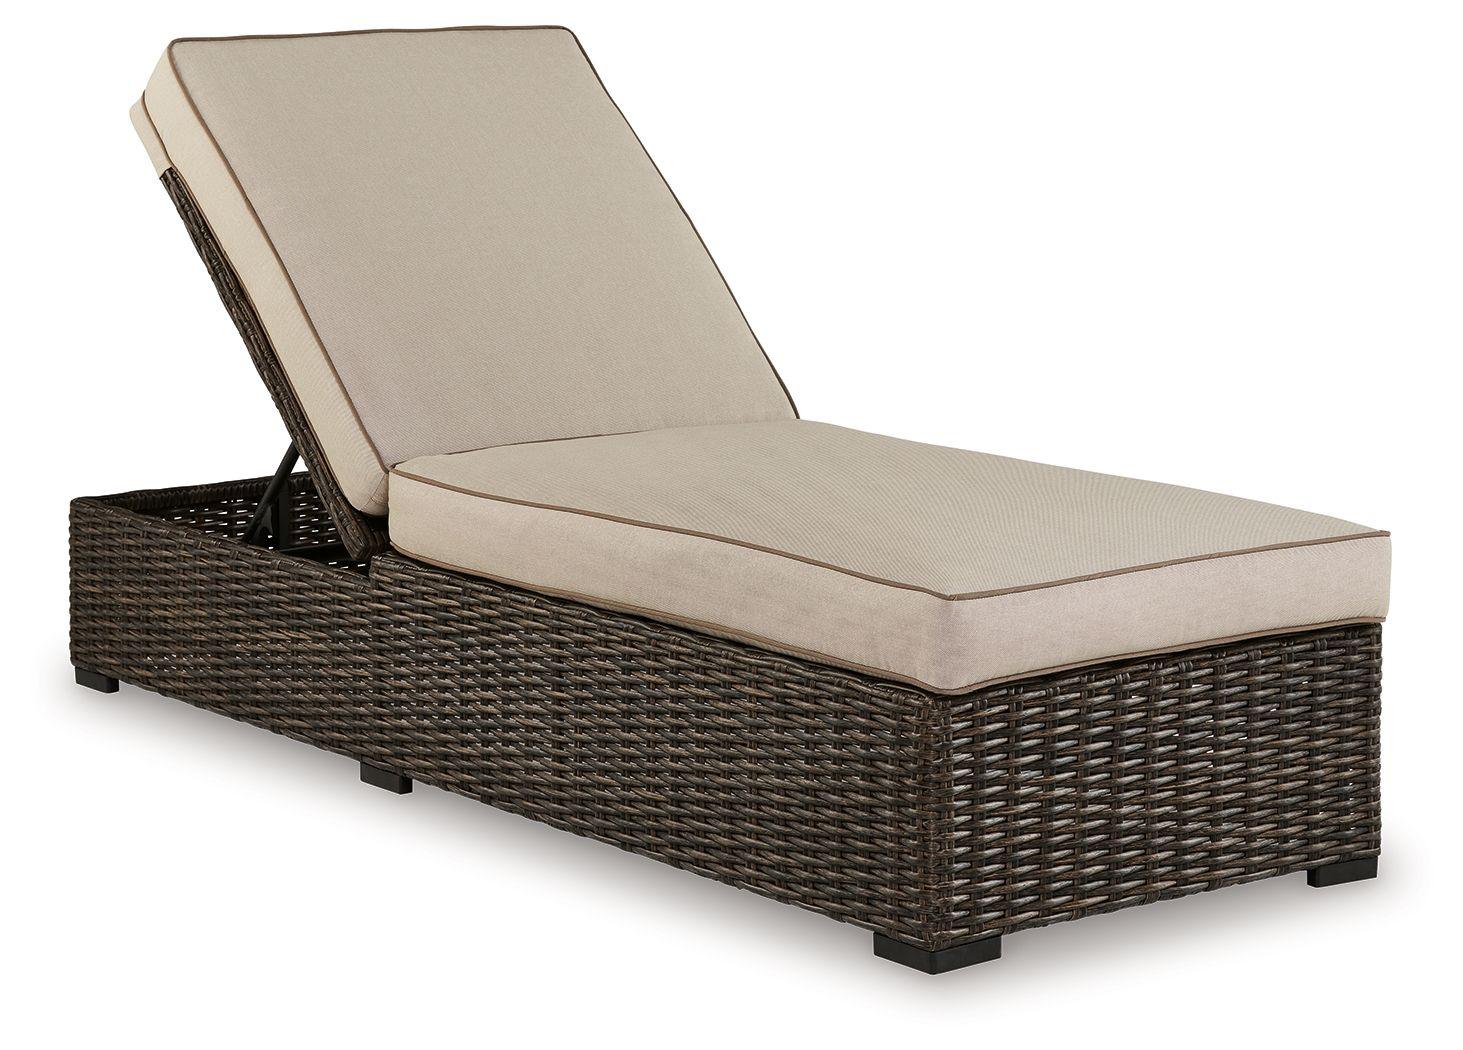 Signature Design by Ashley® - Coastline Bay - Brown - Chaise Lounge With Cushion - 5th Avenue Furniture